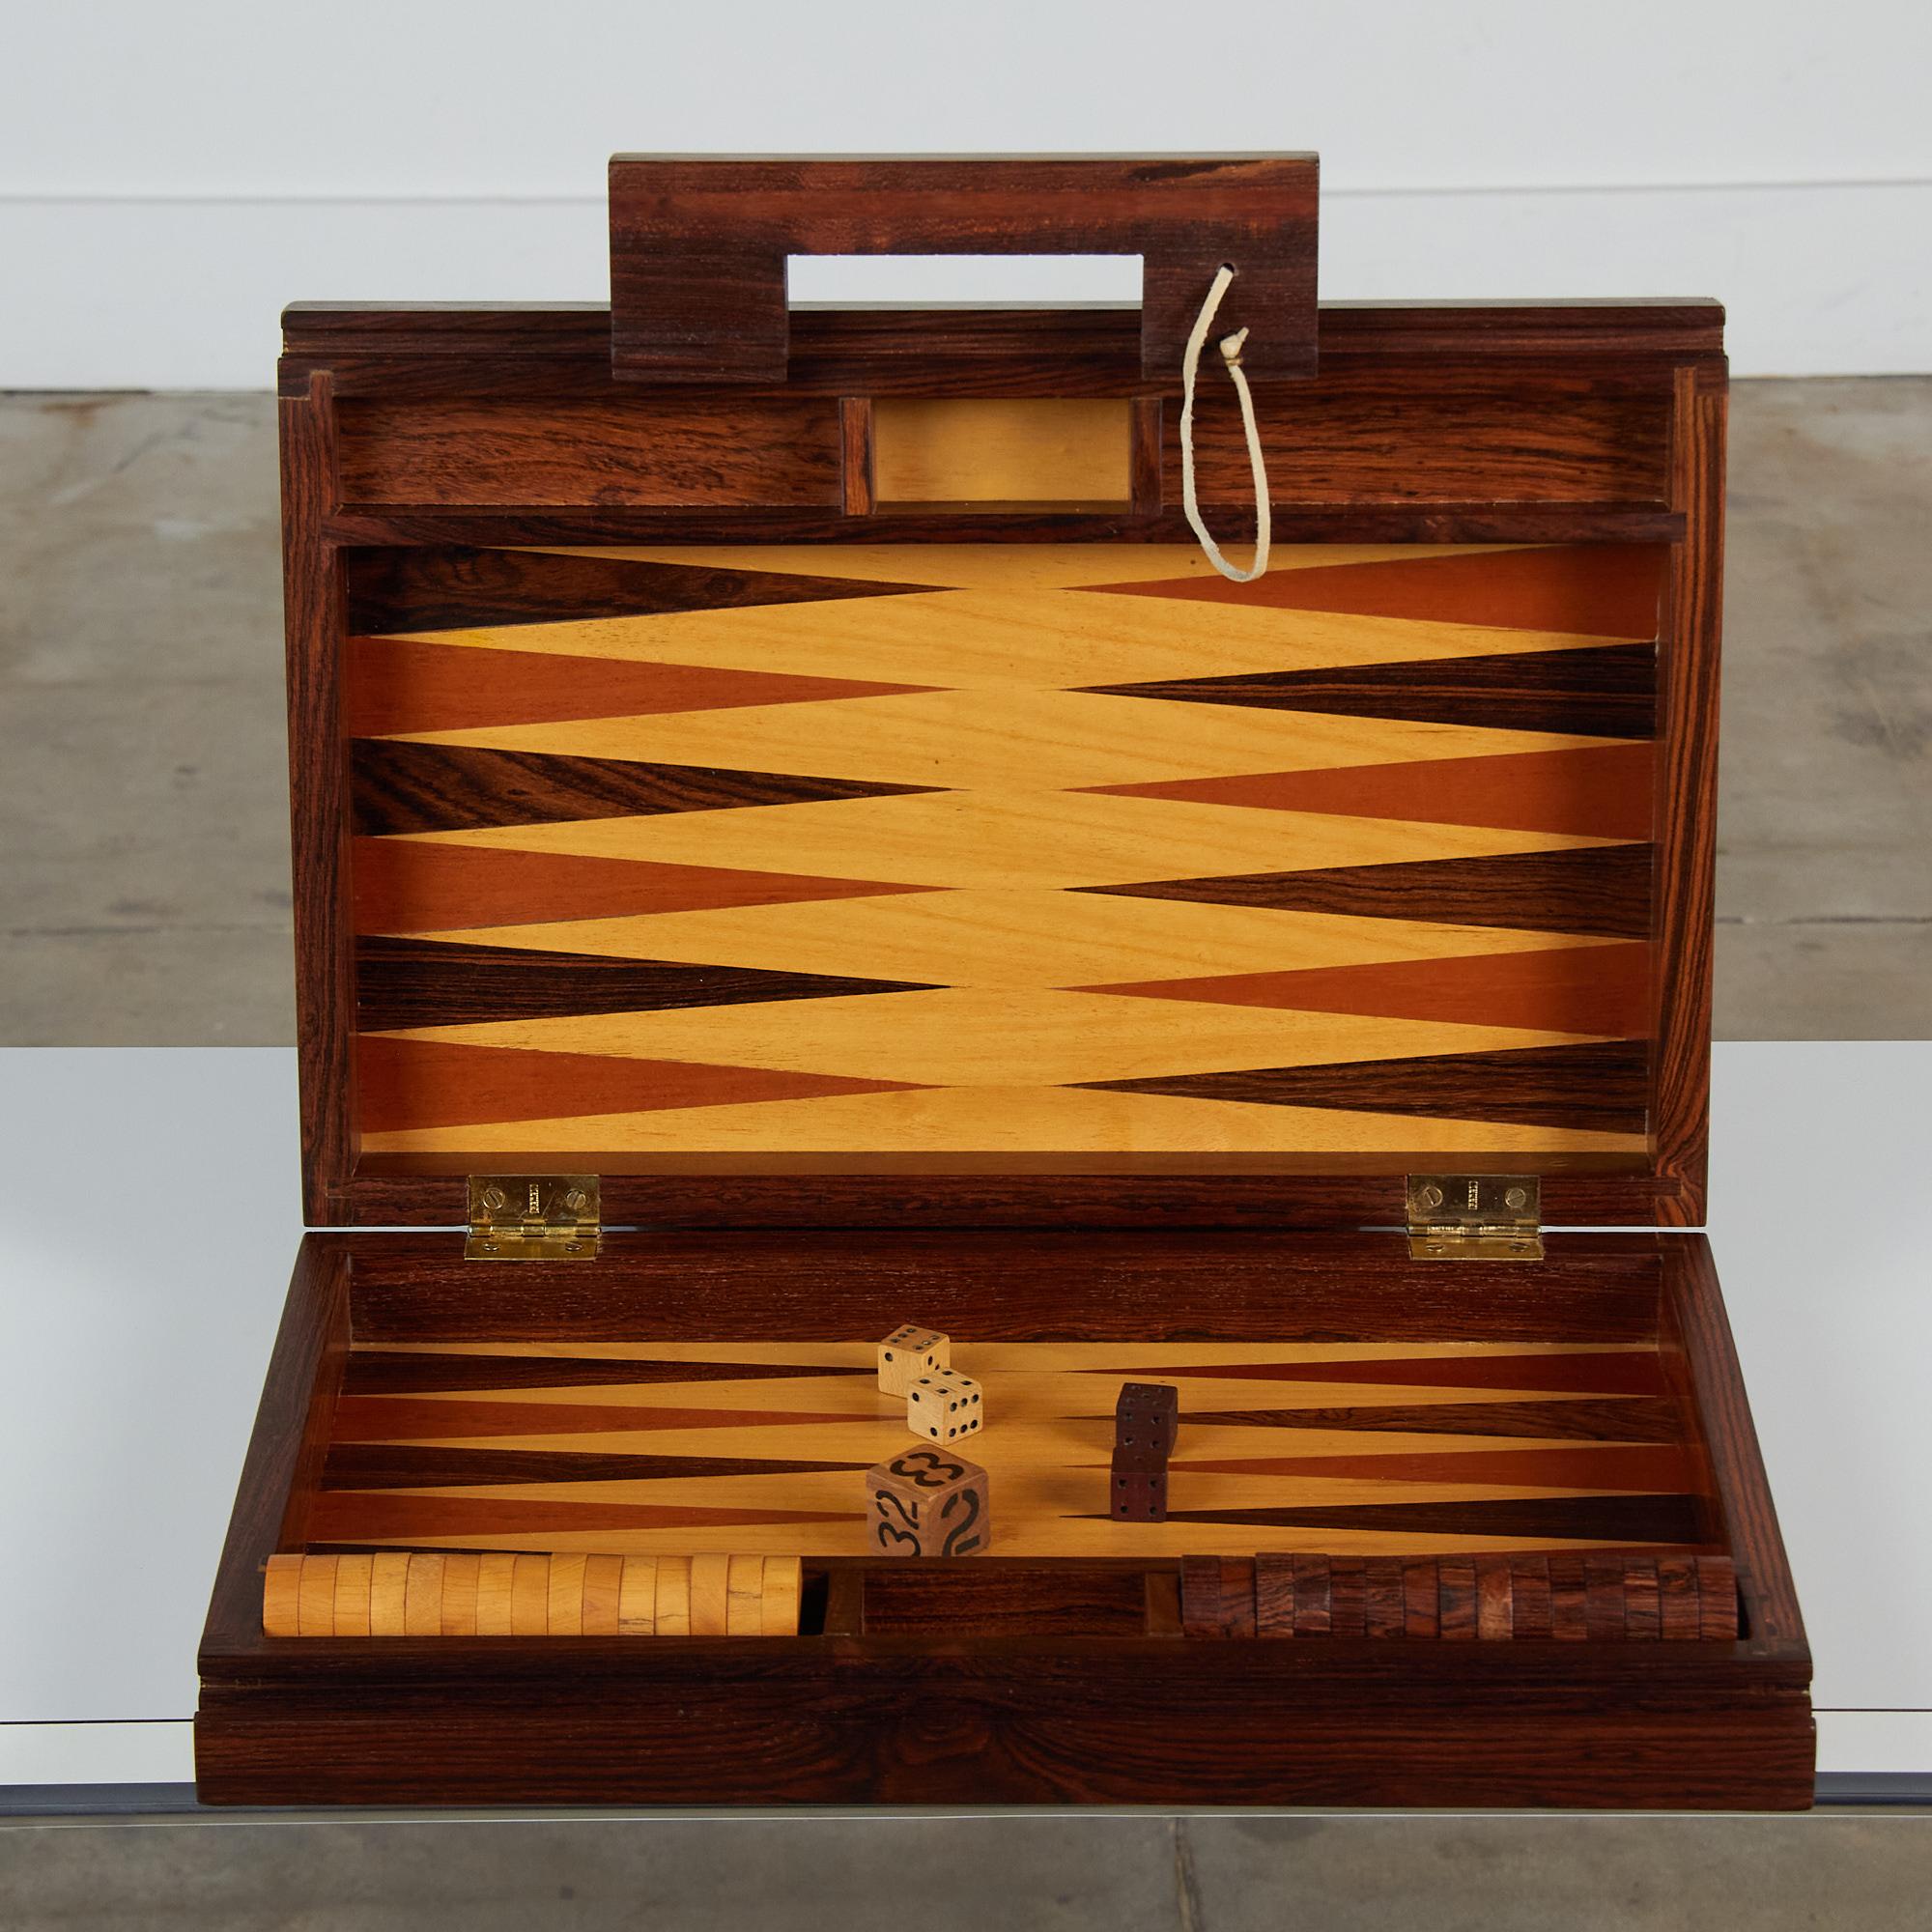 A modernist backgammon set by US-born, Mexico-based designer Don Shoemaker for his company Señal. This portable set includes the game board, which folds up into a carrying case, checkers, rolling dice, and doubling dice. Made from local hardwood